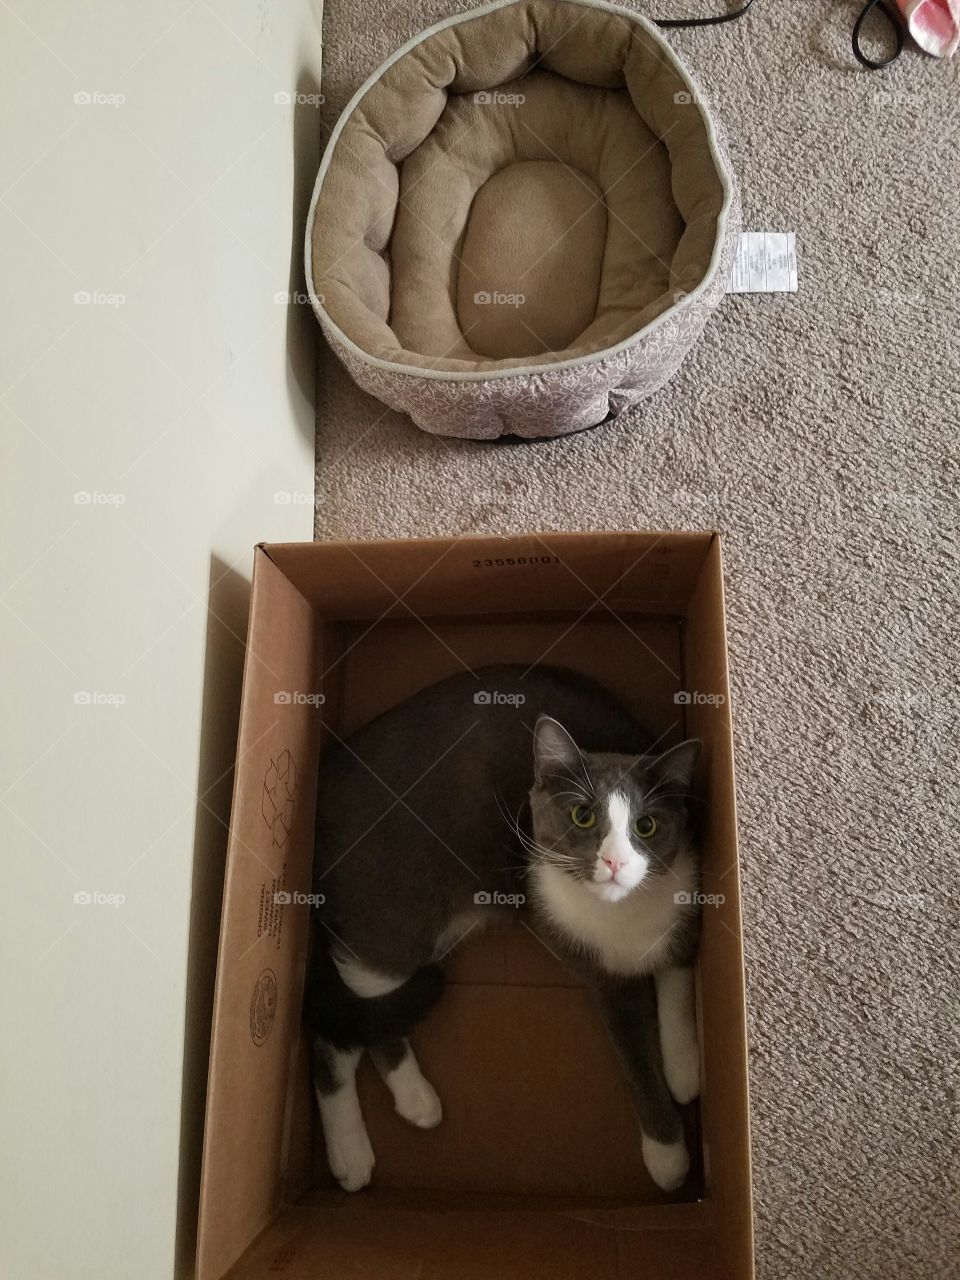 the cat in the box